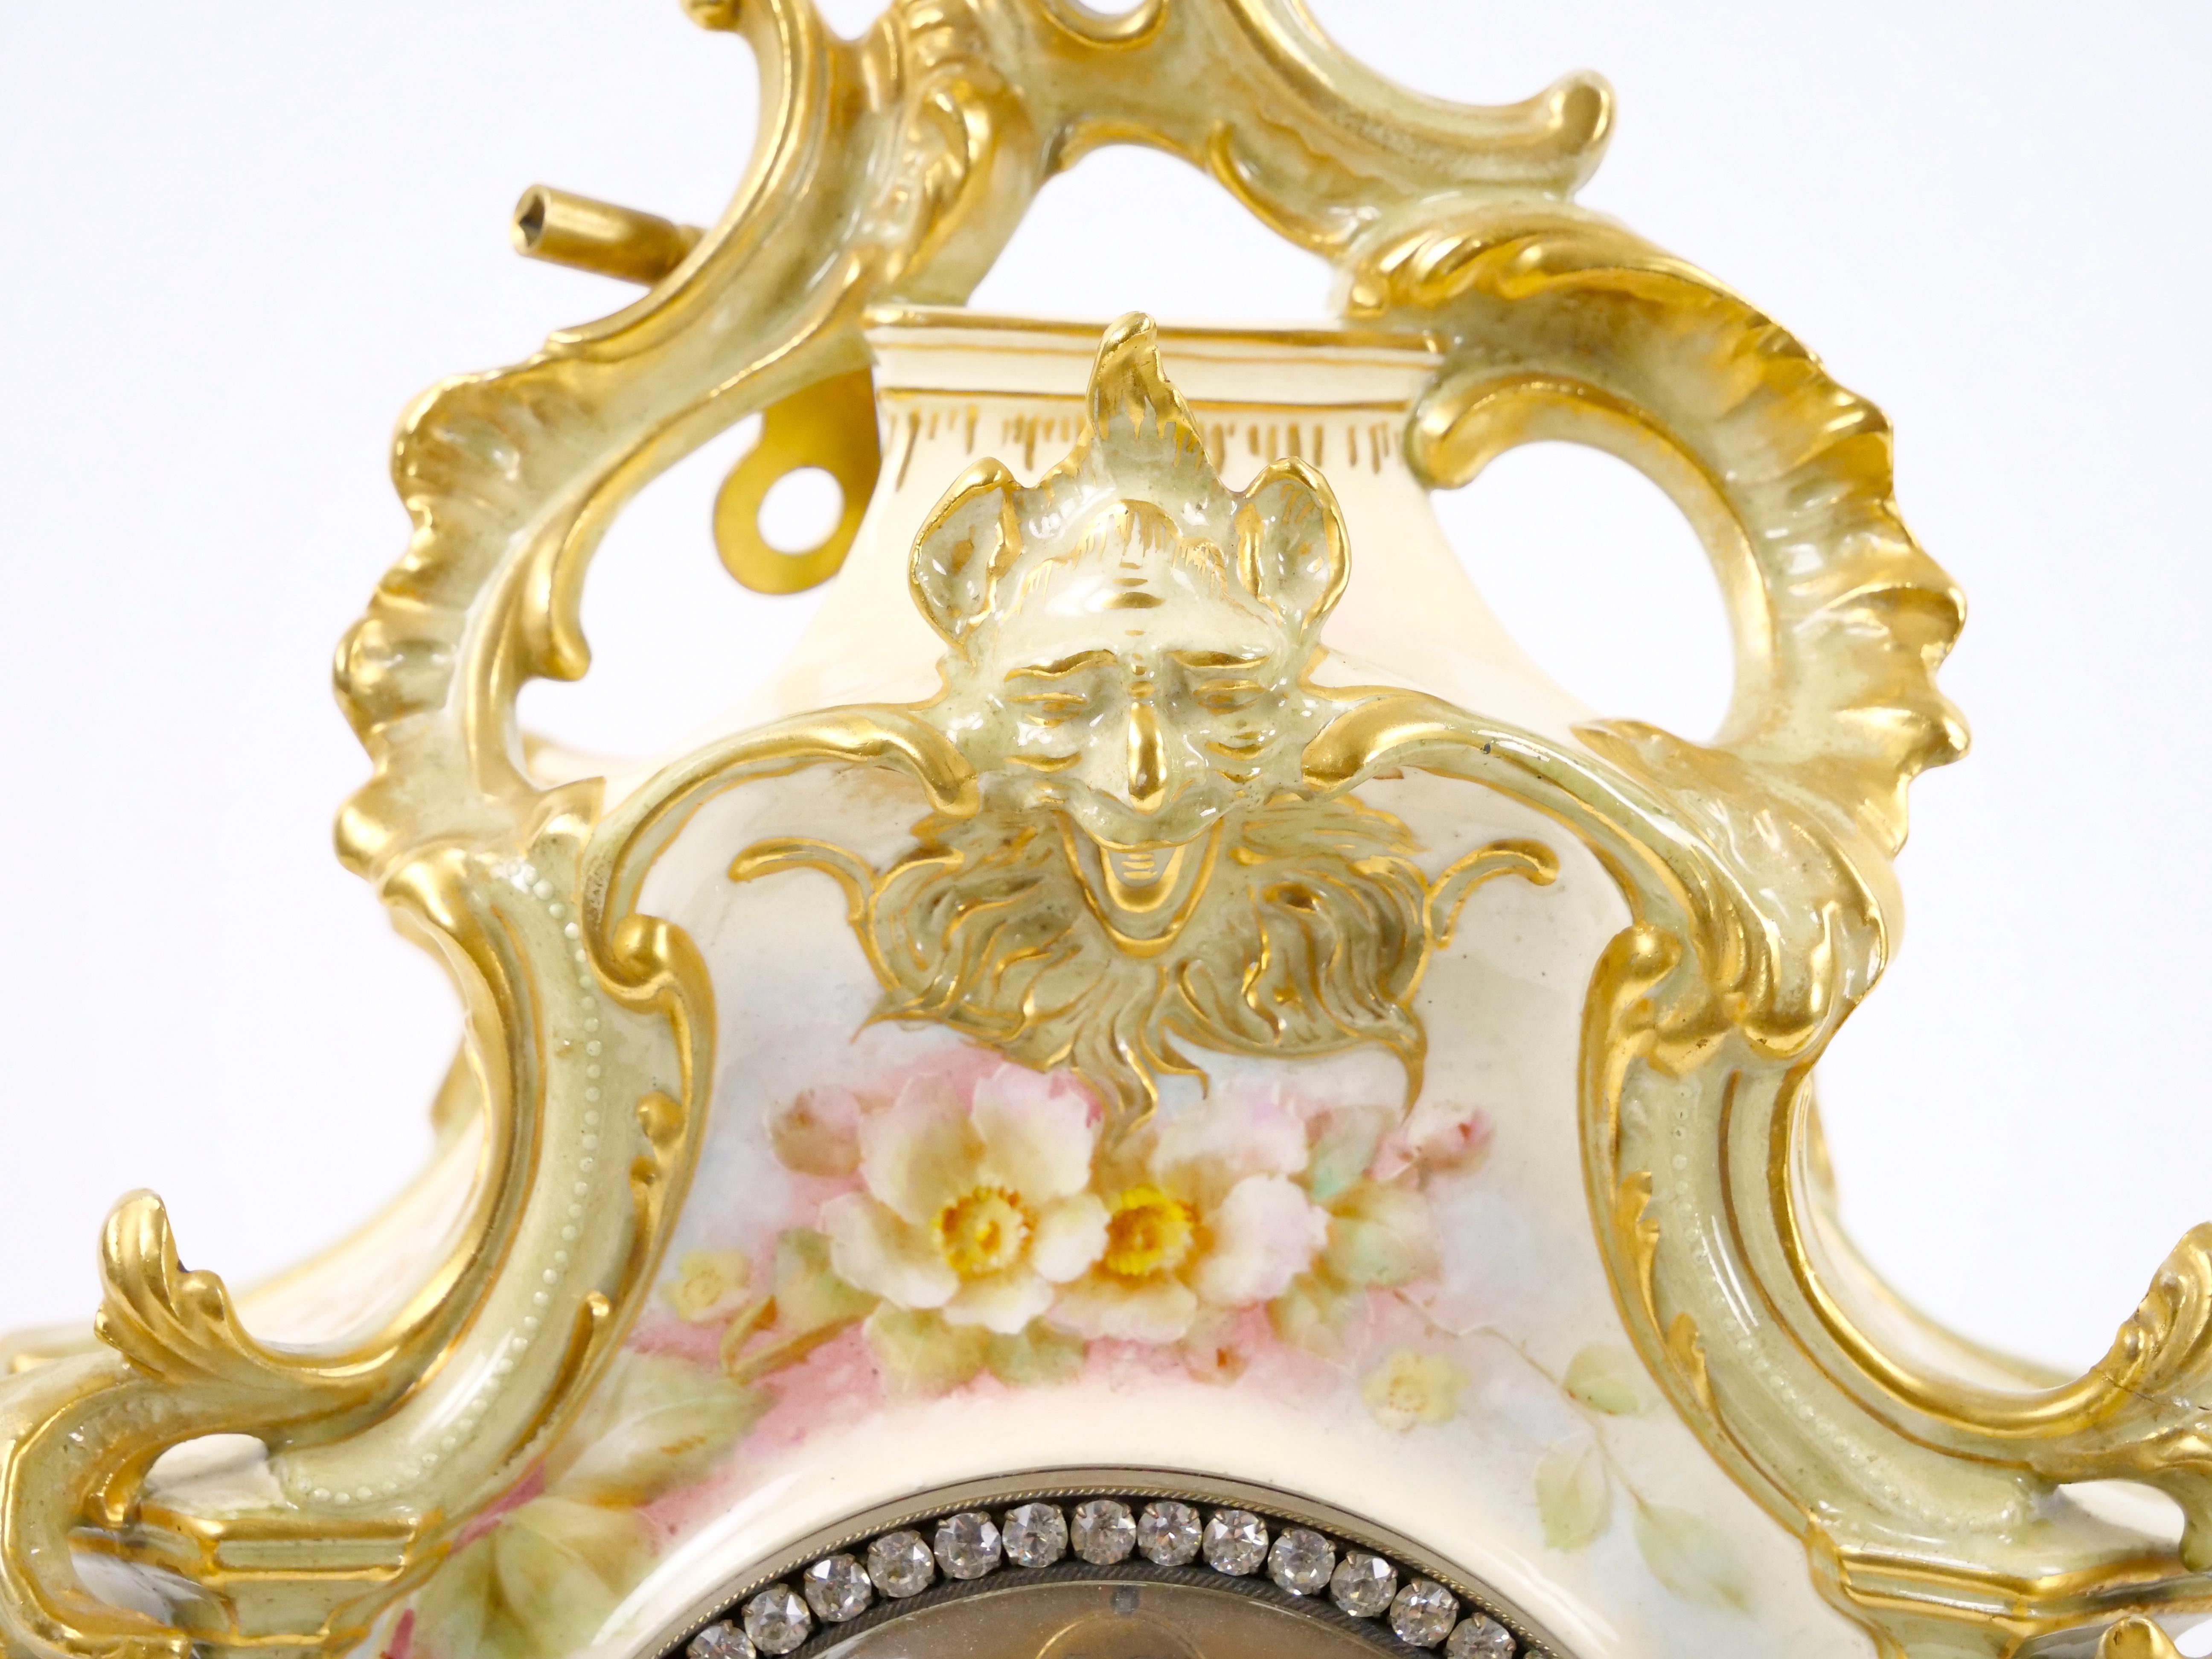 19th Century French Hand Painted/Gilt Decorated Porcelain Mantel Clock 2